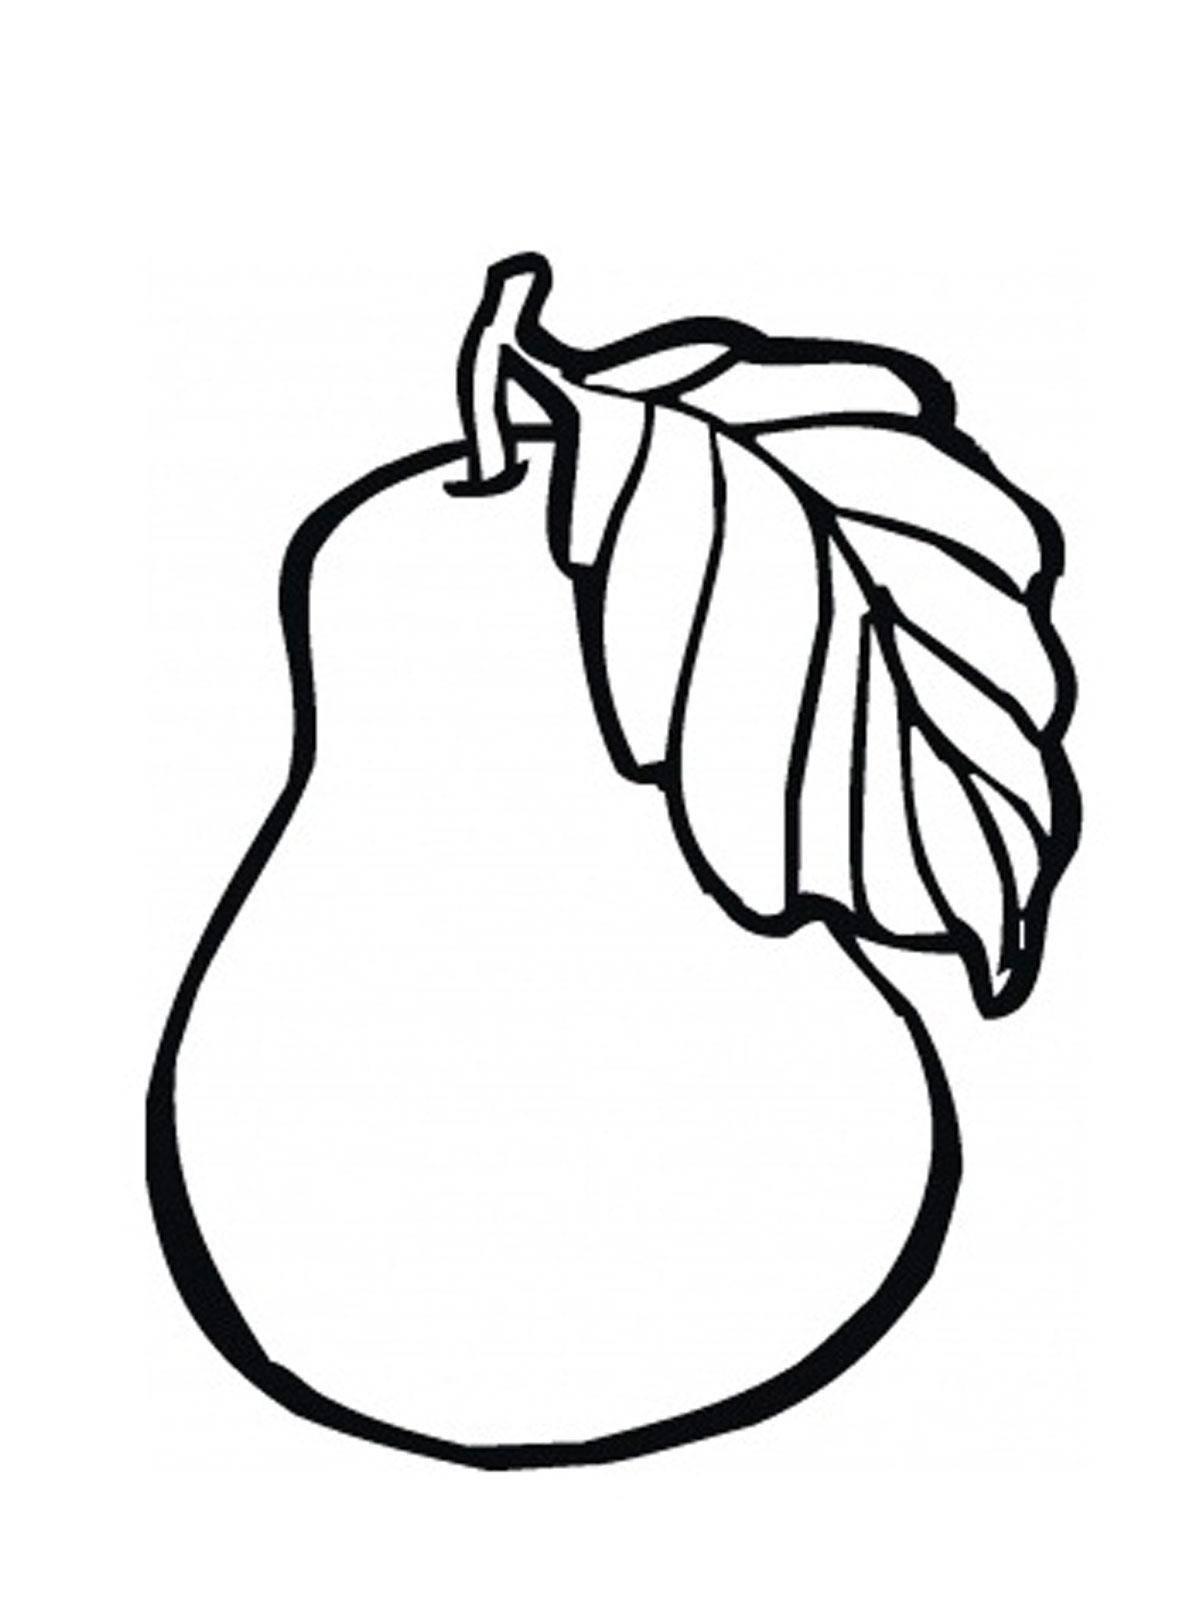 Coloring Pear. Category fruits. Tags:  the Duchess .